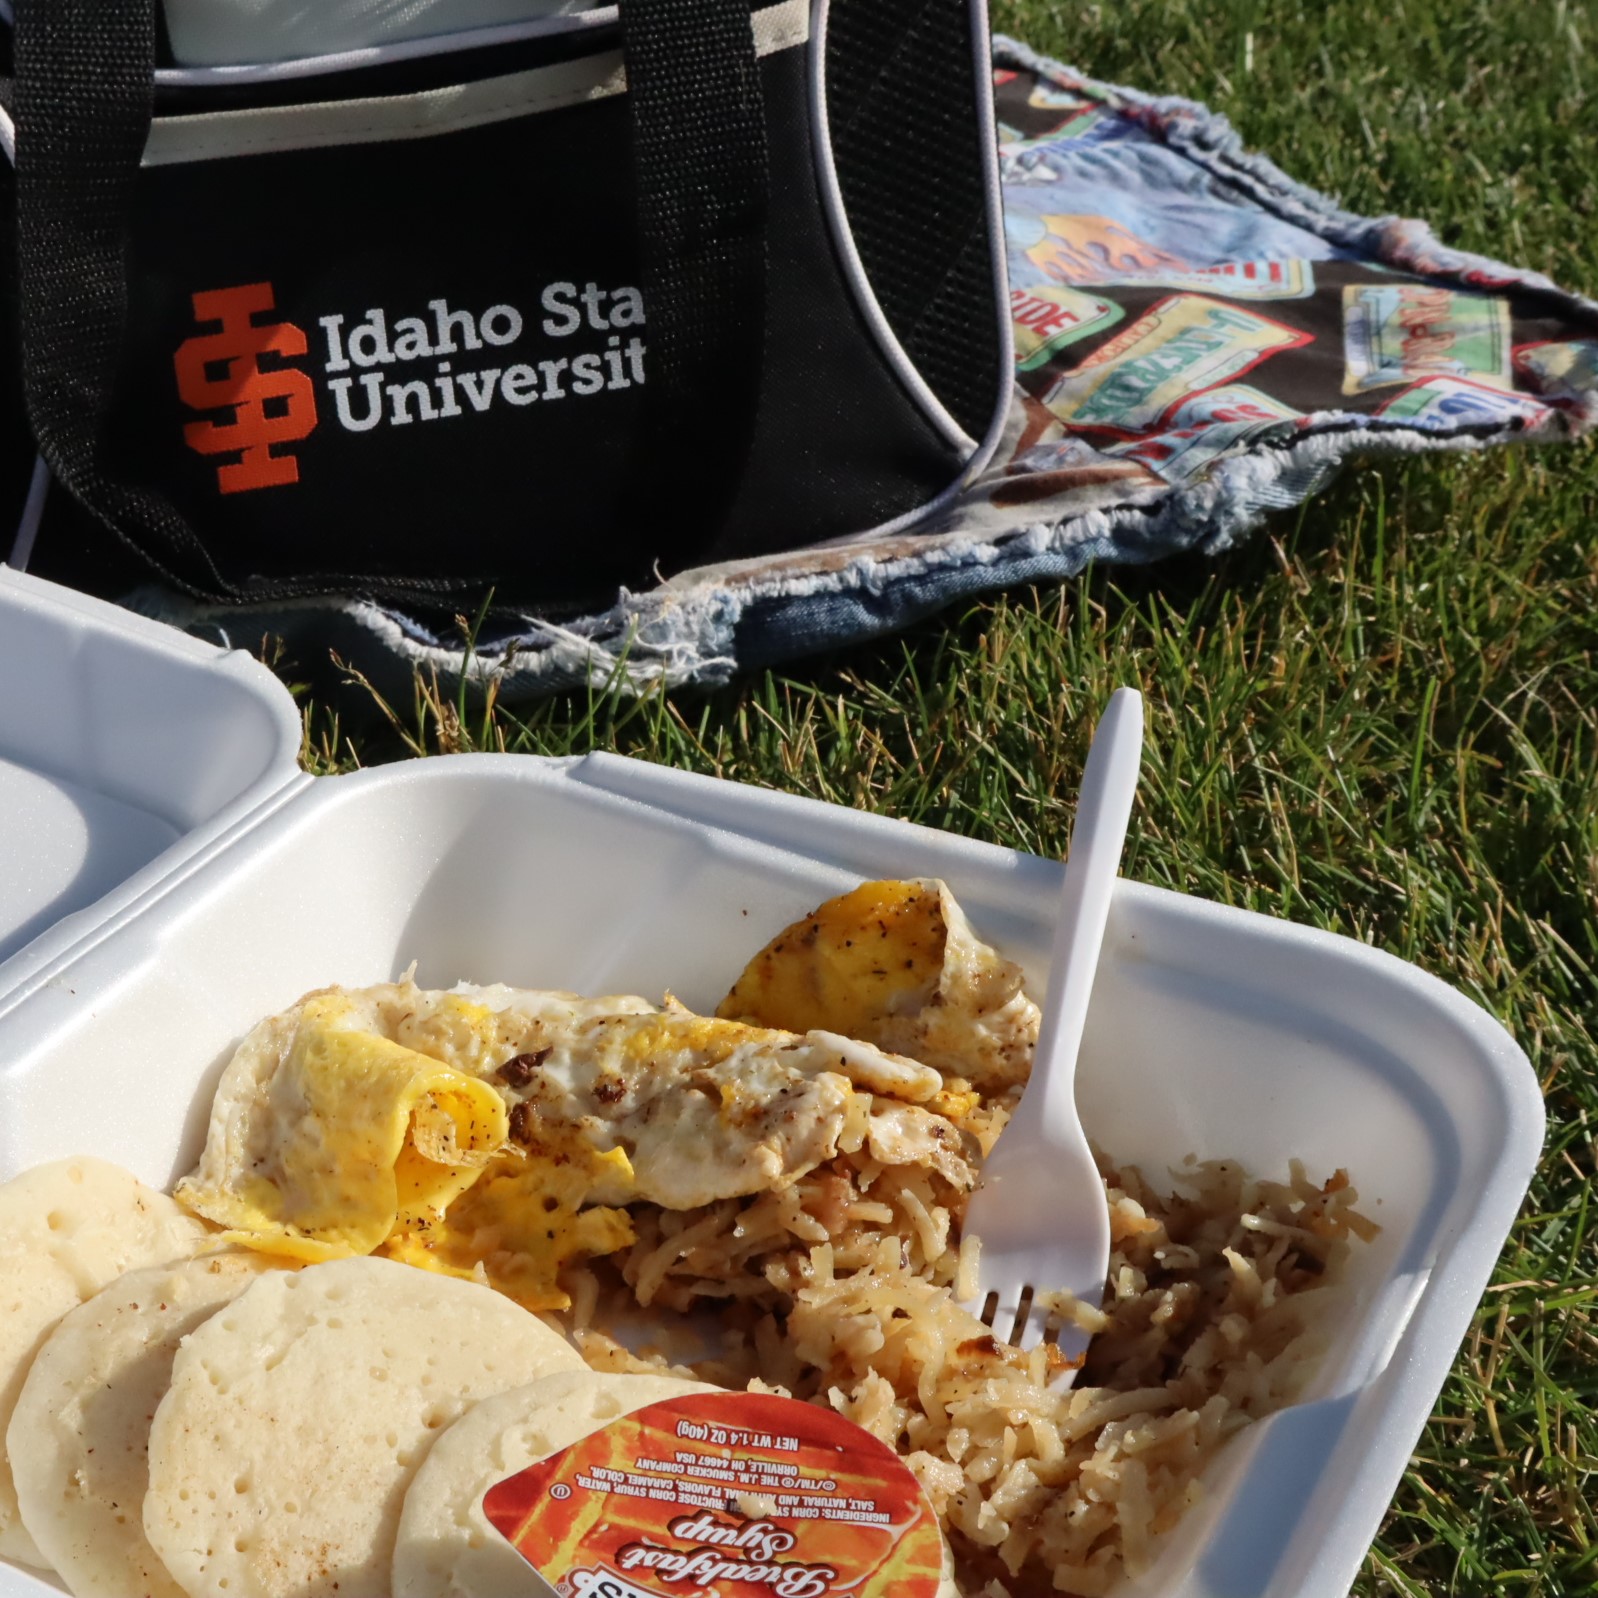 pancakes, eggs, and hashbrowns from the Busy Bee Food Truck in a Styrofoam container near a picnic blanket